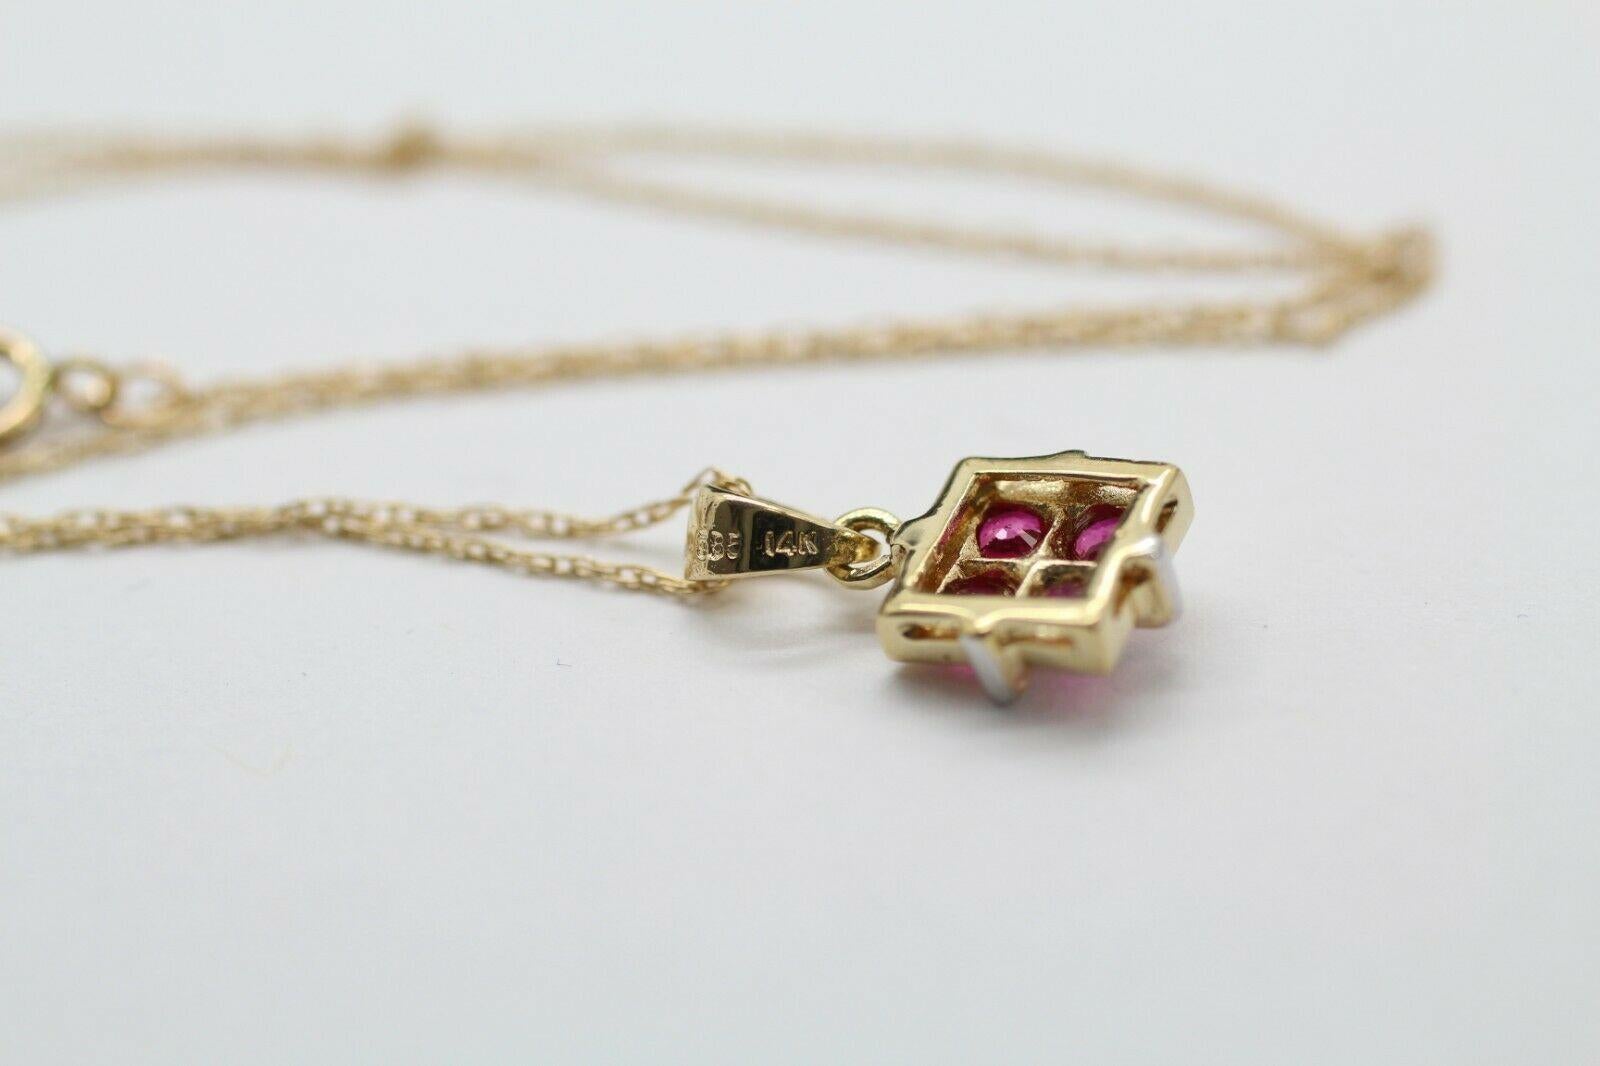  14k yellow gold ruby pendant, containing 
Specifications:
    PENDANT : RUBY BOX PENDANT 4 PIECES 
    CHAIN: LINK CHAIN
    LENGTH: 18.99-19.99 INCH
    weight: 2.15 GTW
    METAL : 14K YELLOW GOLD
    HALMARK: 14K' 585


